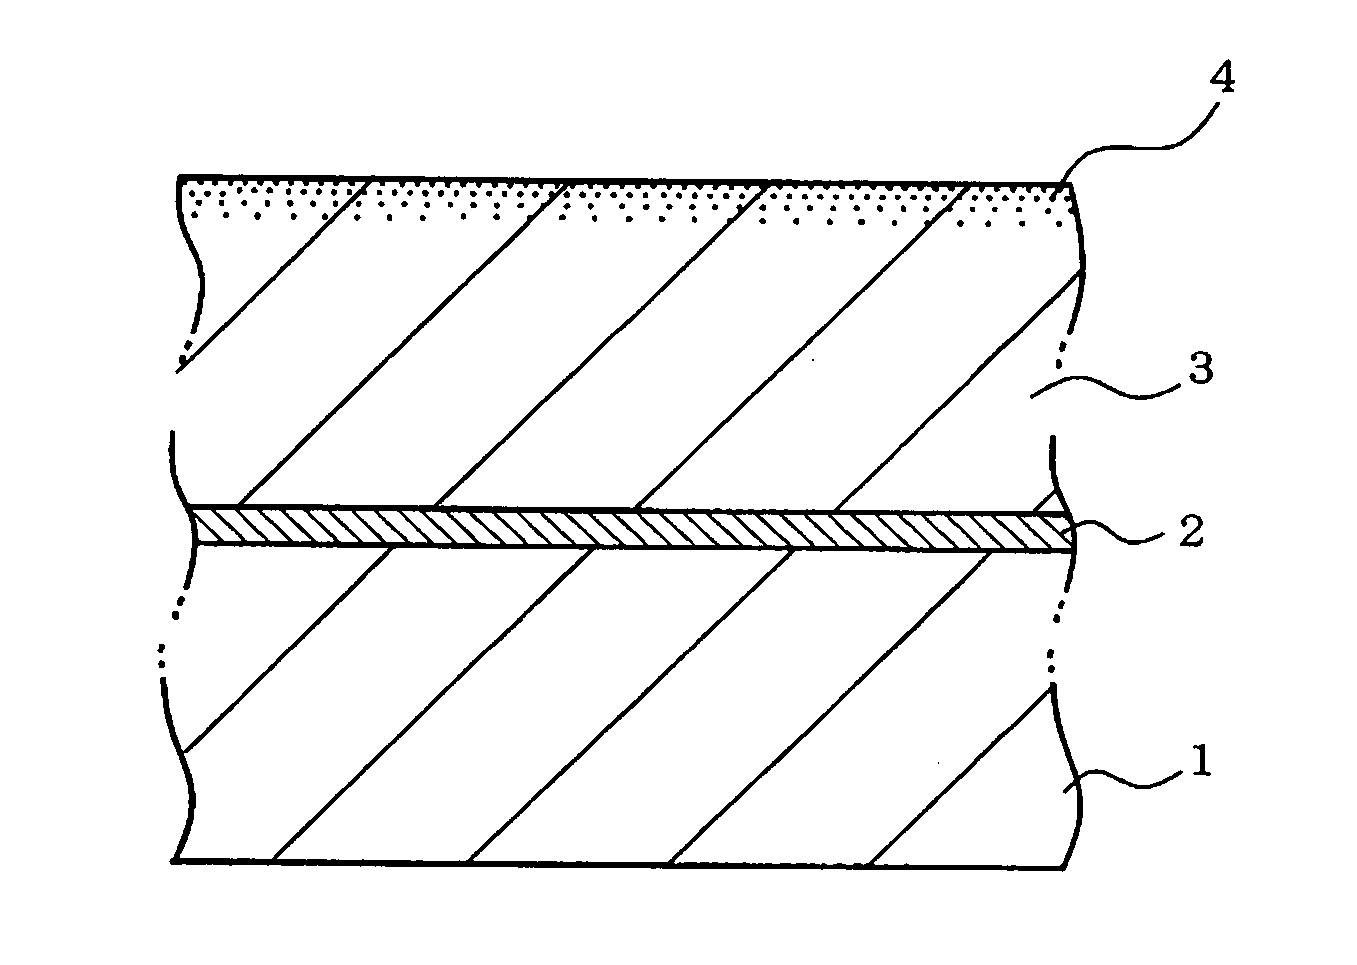 Plain bearing for internal combustion engines